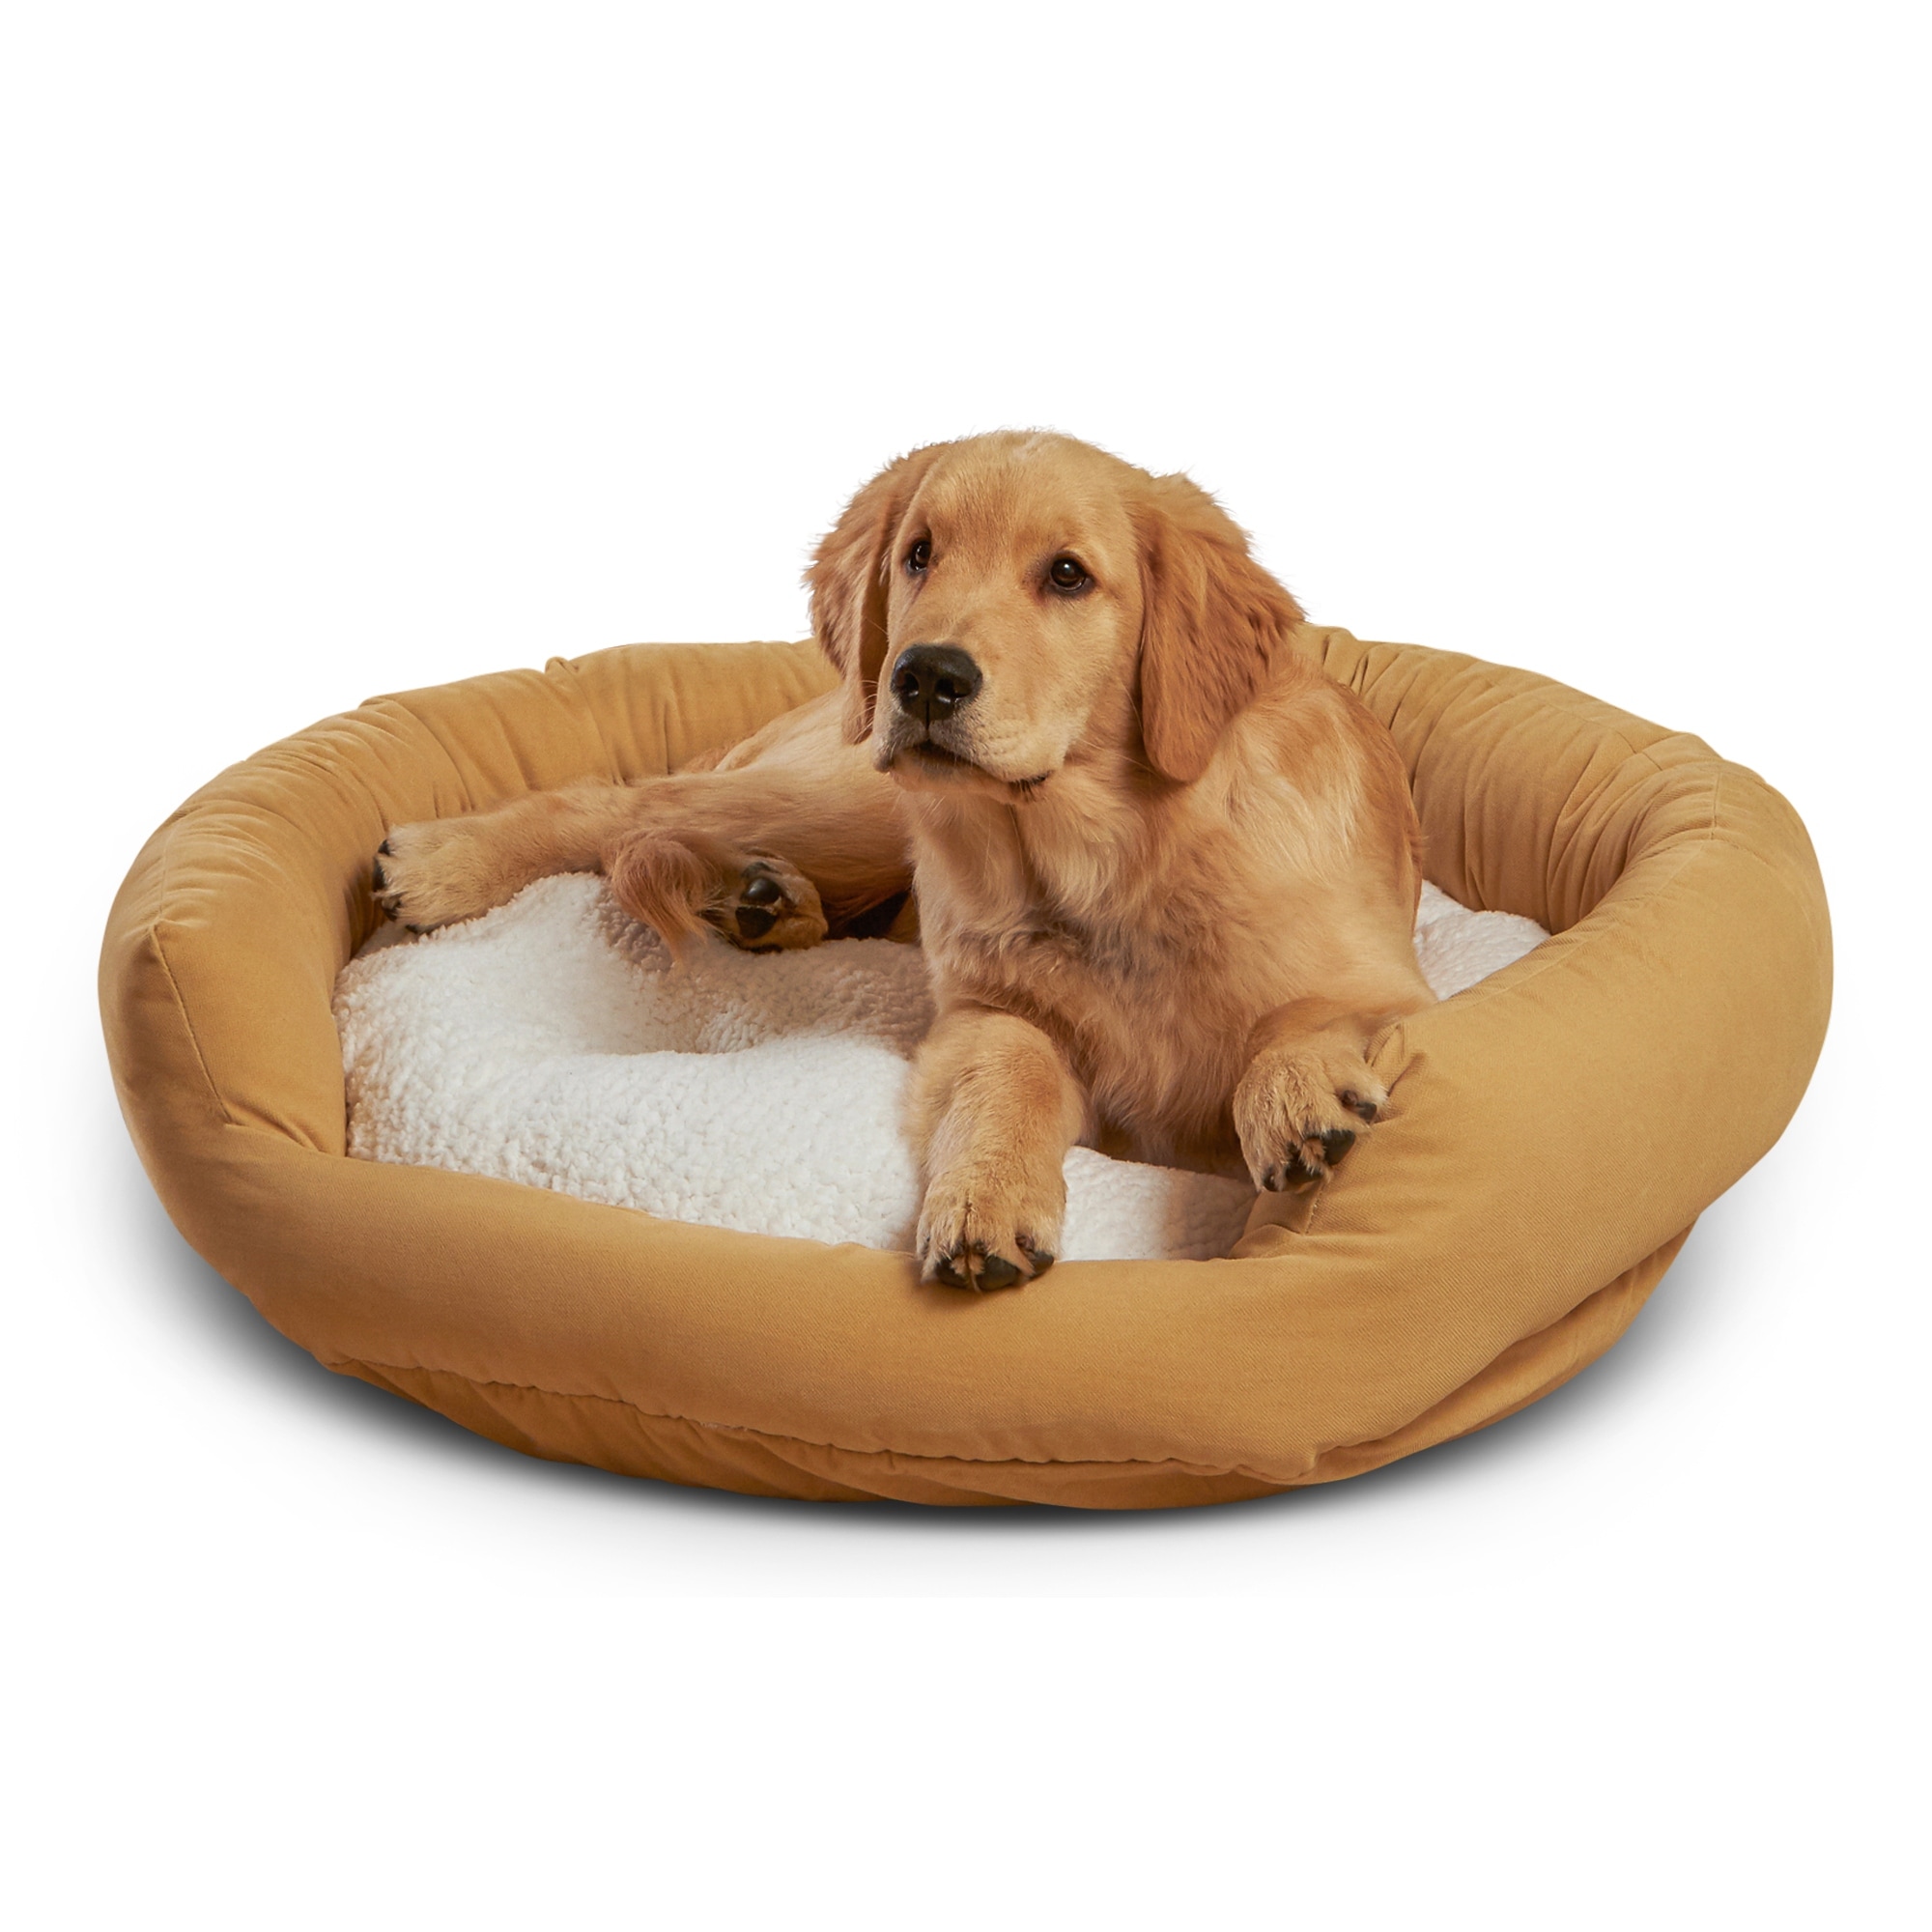 https://ak1.ostkcdn.com/images/products/is/images/direct/11e3bb7c5be60f1ddd7885cb617e7d3beb4049ab/Happy-Hounds-Moxy-Beige-Donut-Dog-Bed.jpg